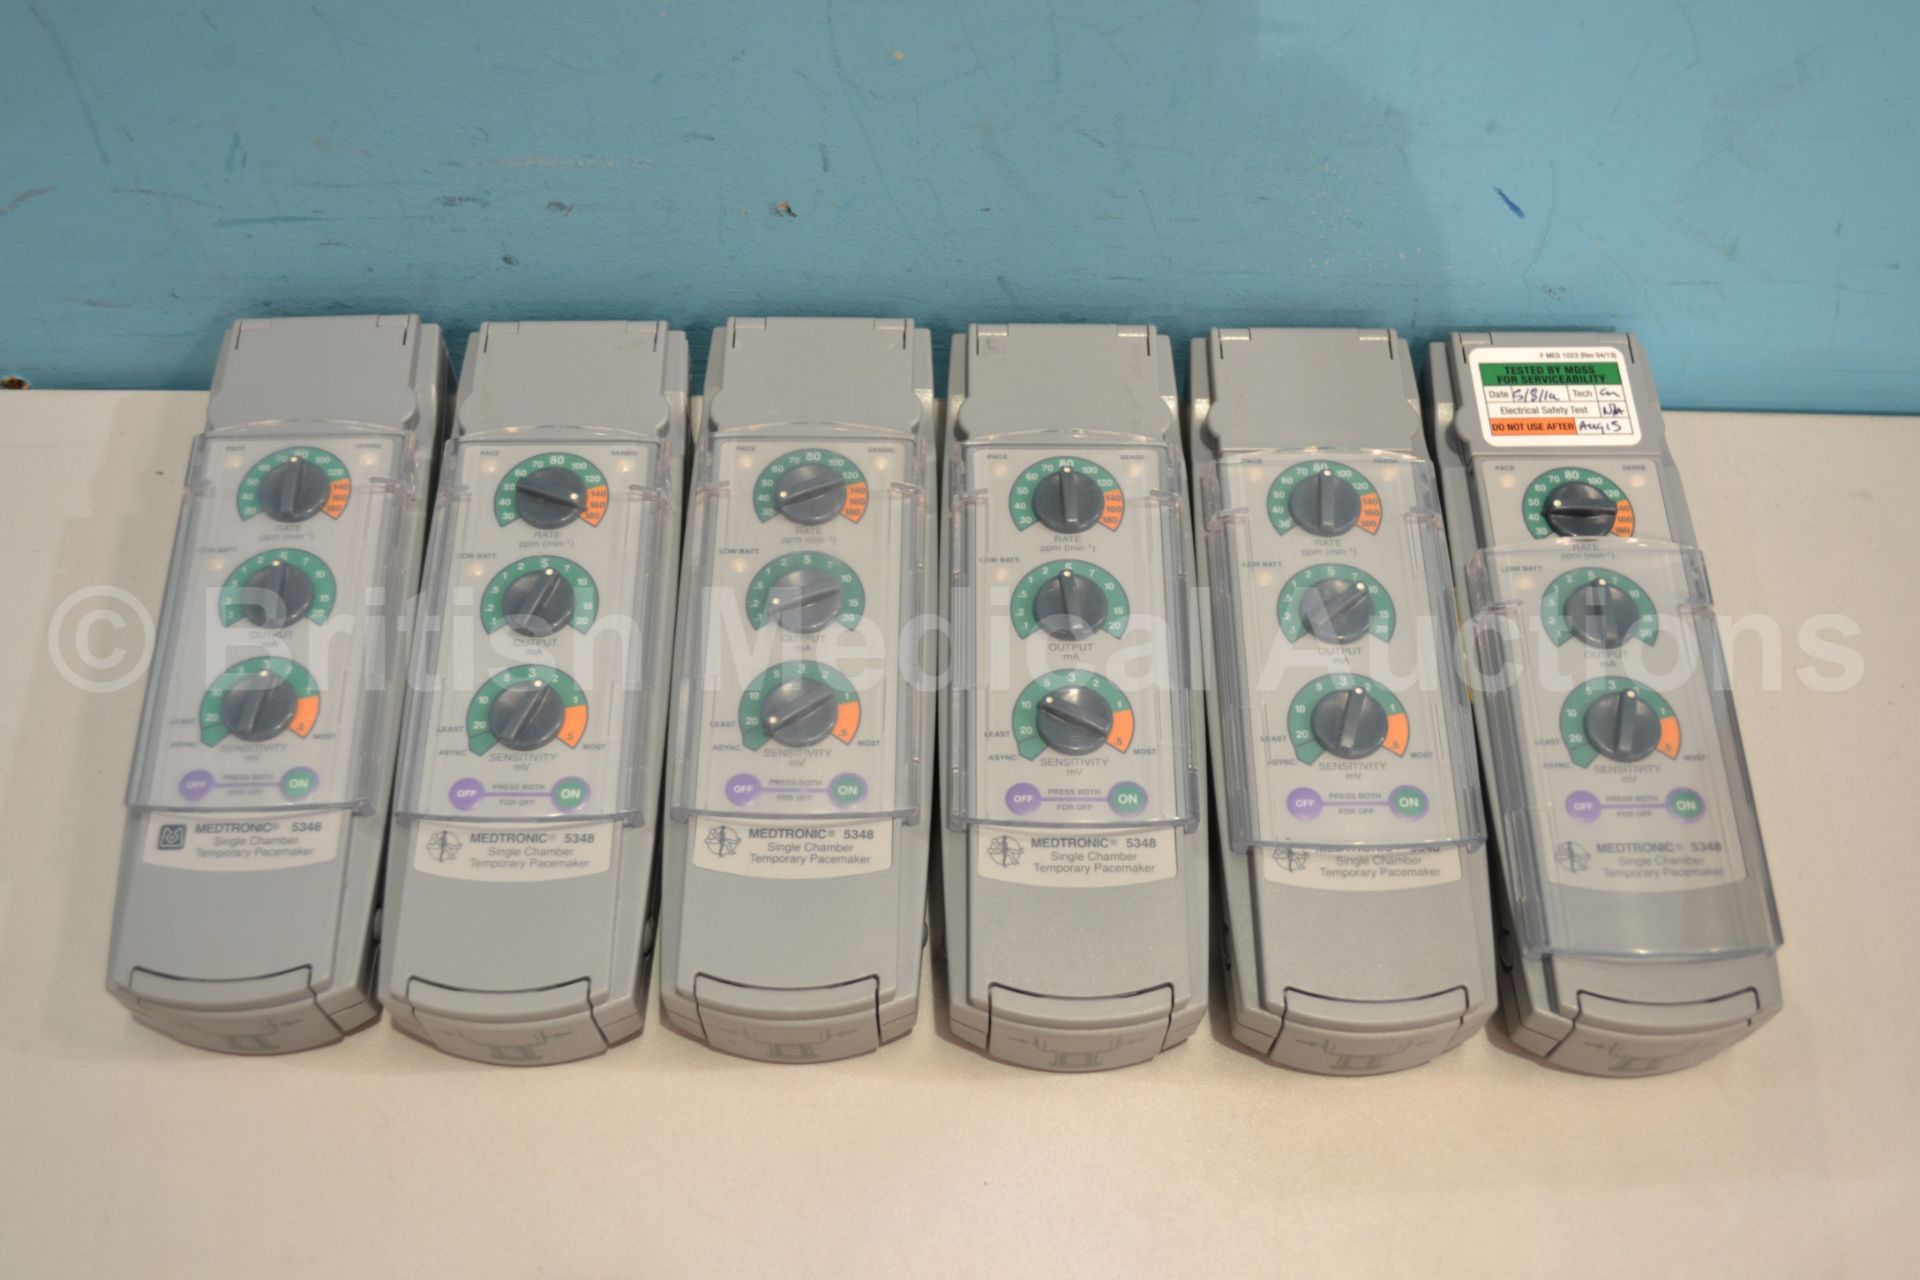 6 x Medtronic 5348 Single Chamber Temporary Pacema